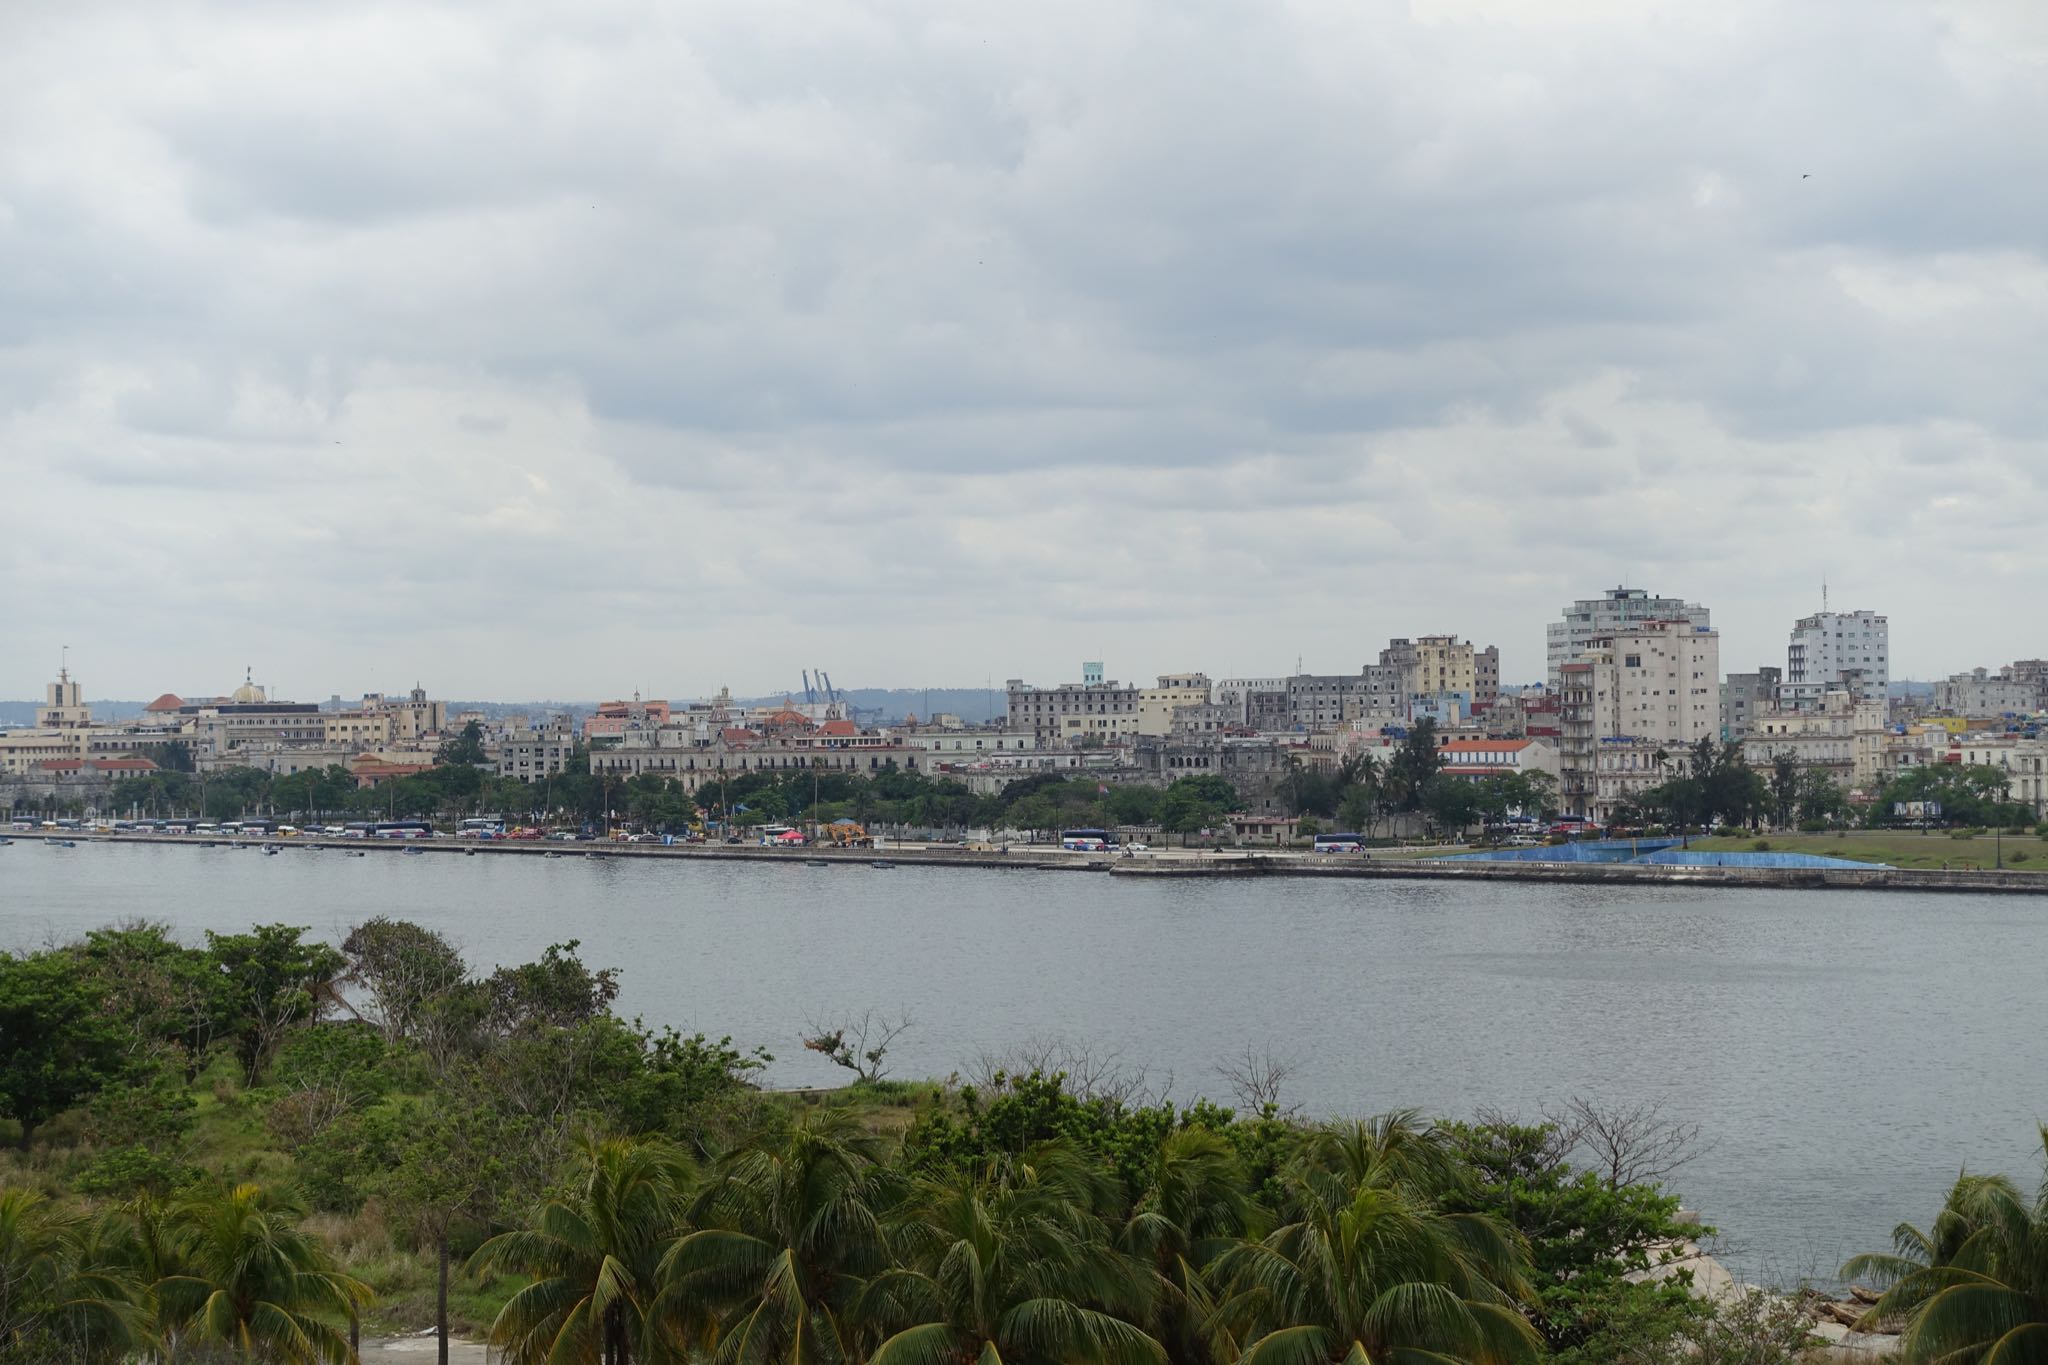 Photo 38 of 221 from the album Highlights Cuba 2019.